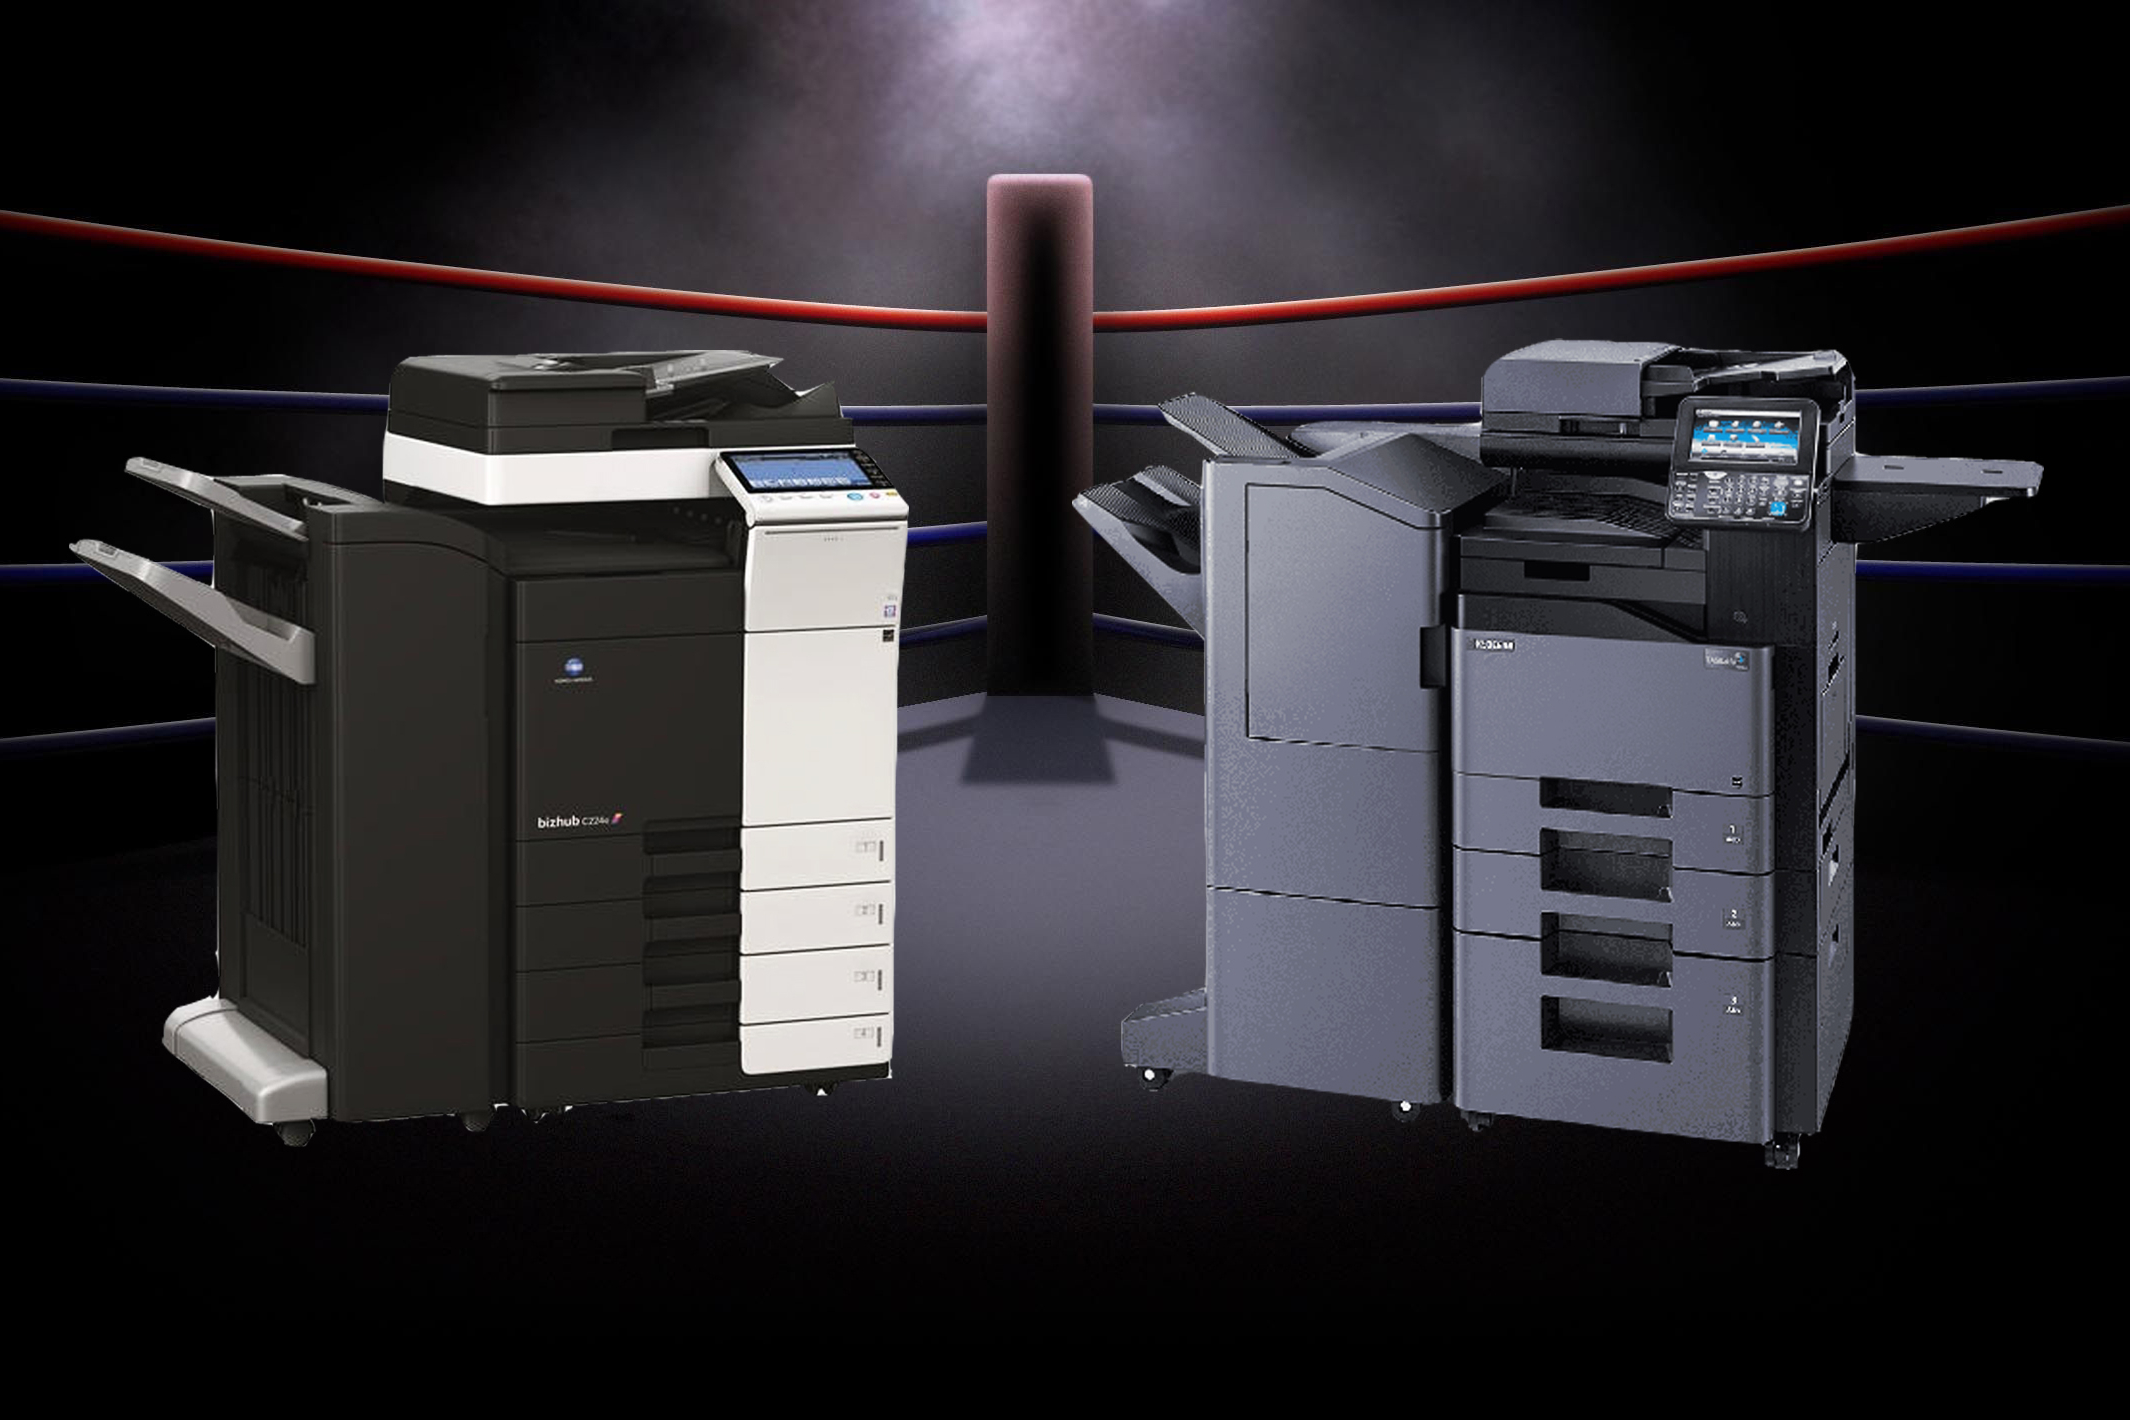 You are currently viewing Integrations of Third-Party App for Your Kyocera Copier